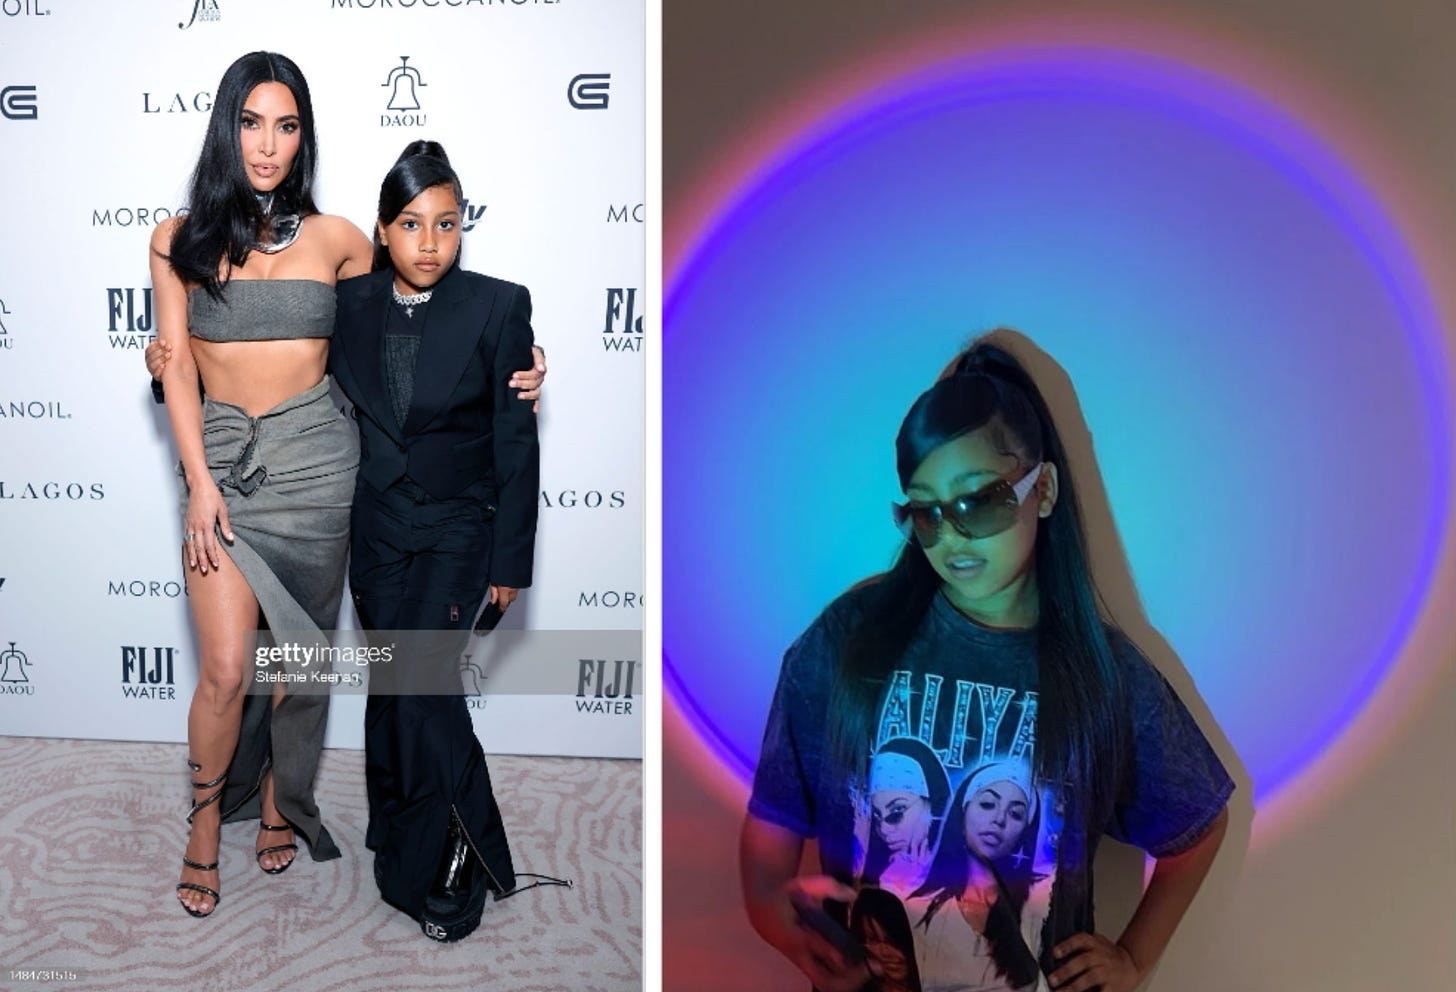 How To Recreate Kendall Jenner's and Megan Fox's Iconic Streetwear